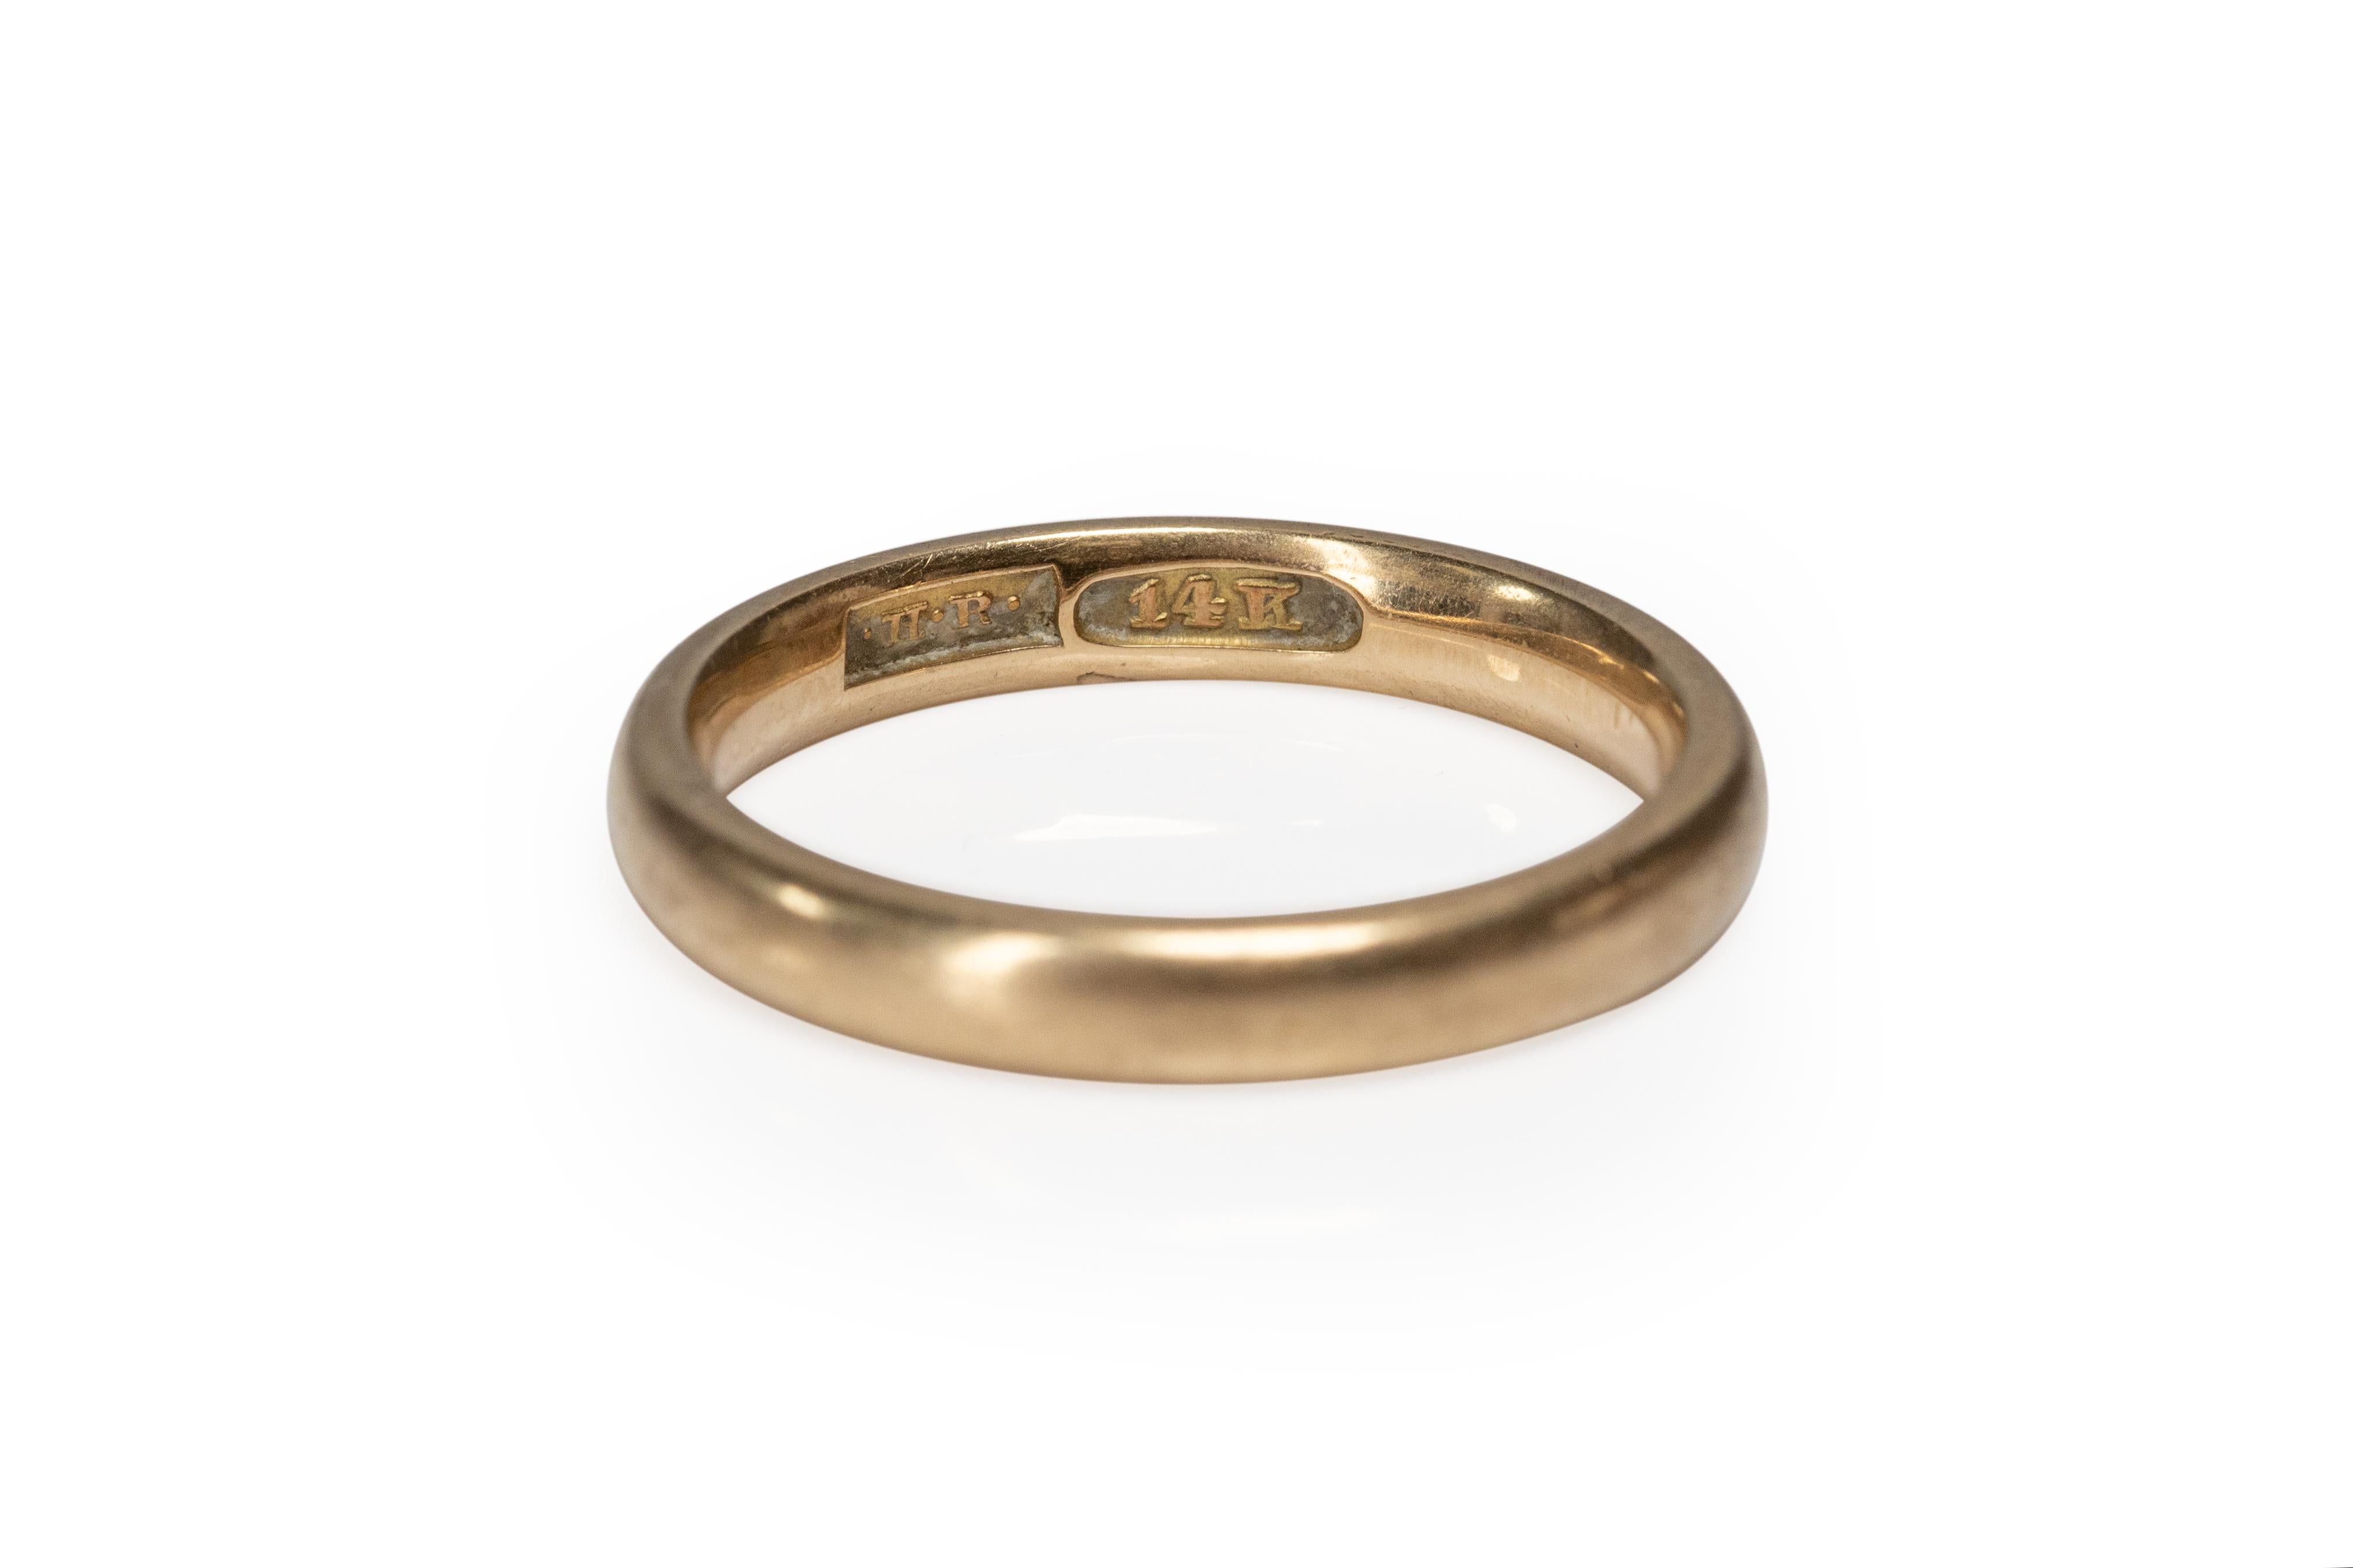 Ring Size: 8.5
Metal Type: 14 karat Yellow Gold [Hallmarked, and Tested]
Weight: 5 grams

Finger to Top of Stone Measurement: 2 mm
Condition: Excellent